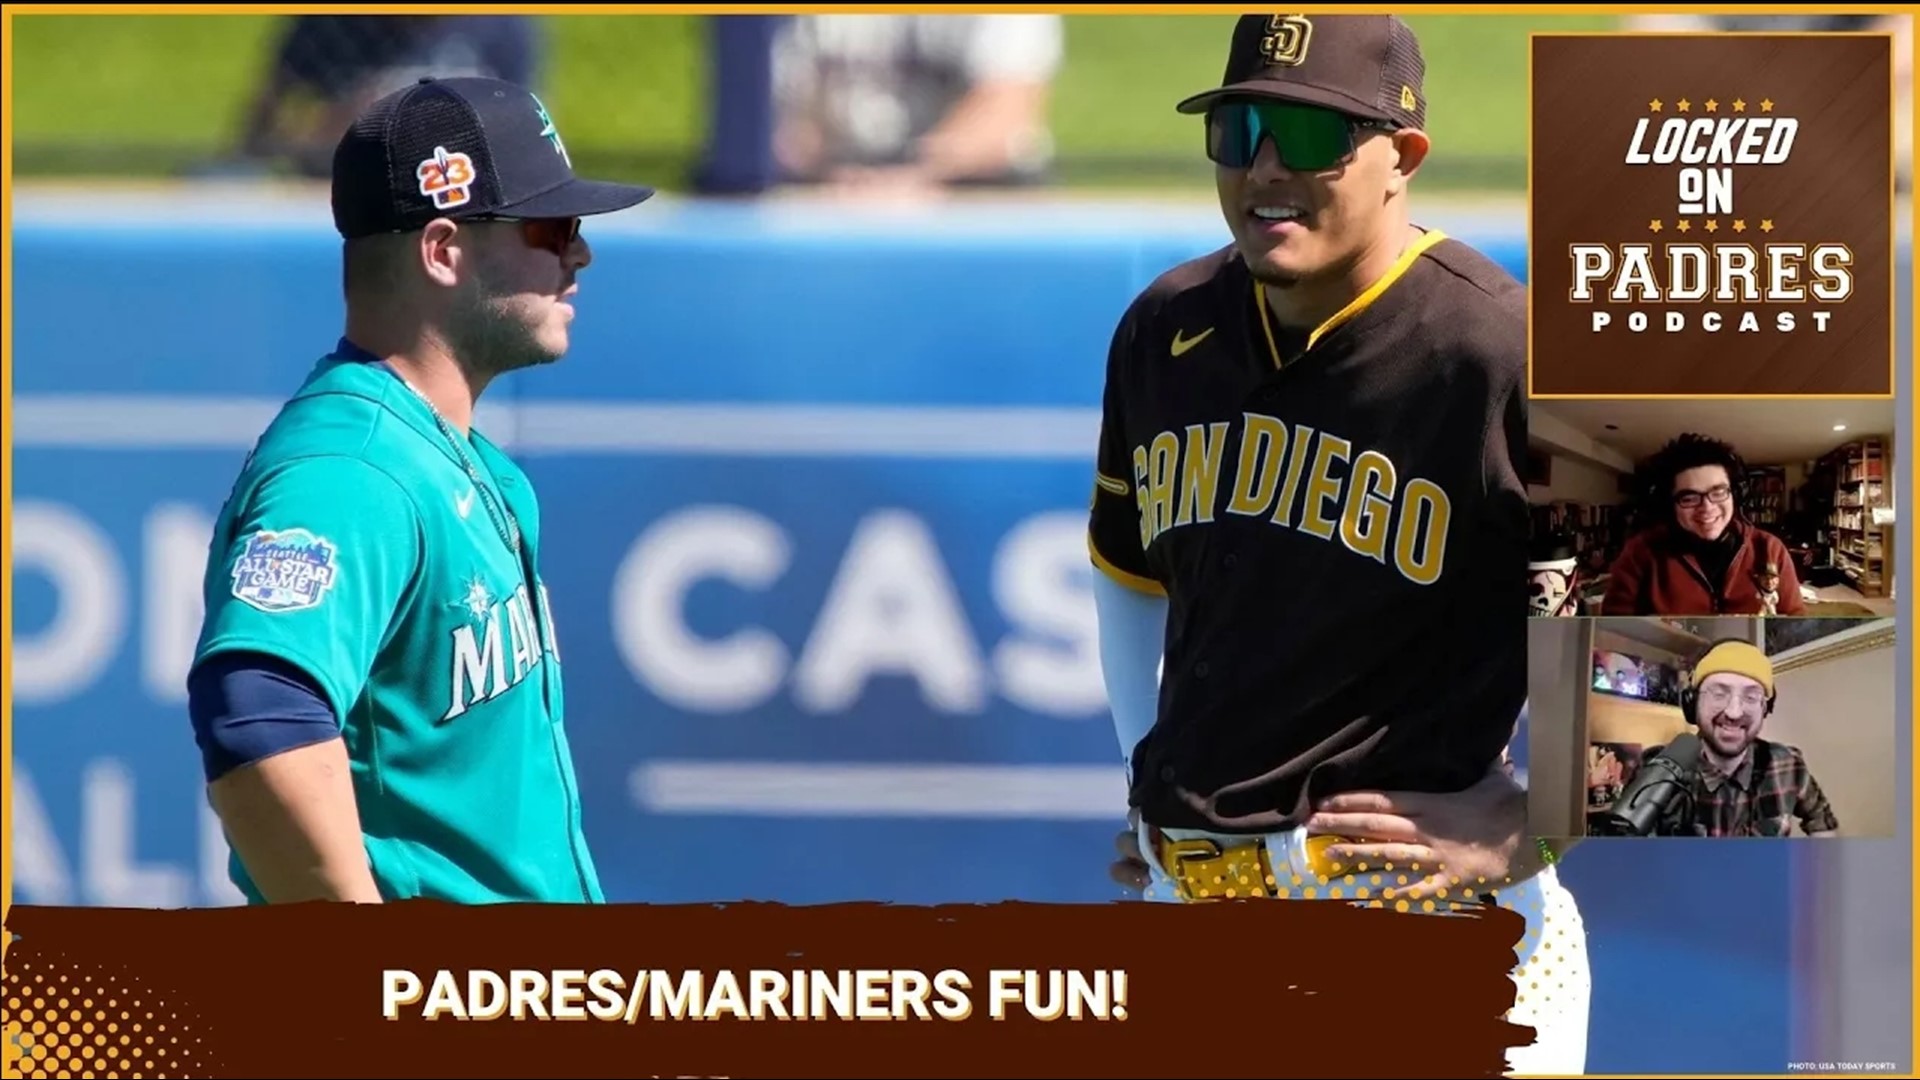 On today's episode, Javier is joined by Ty Dane Gonzalez (host of Locked On Mariners) for a good ole' season preview on the Padres and Mariners!